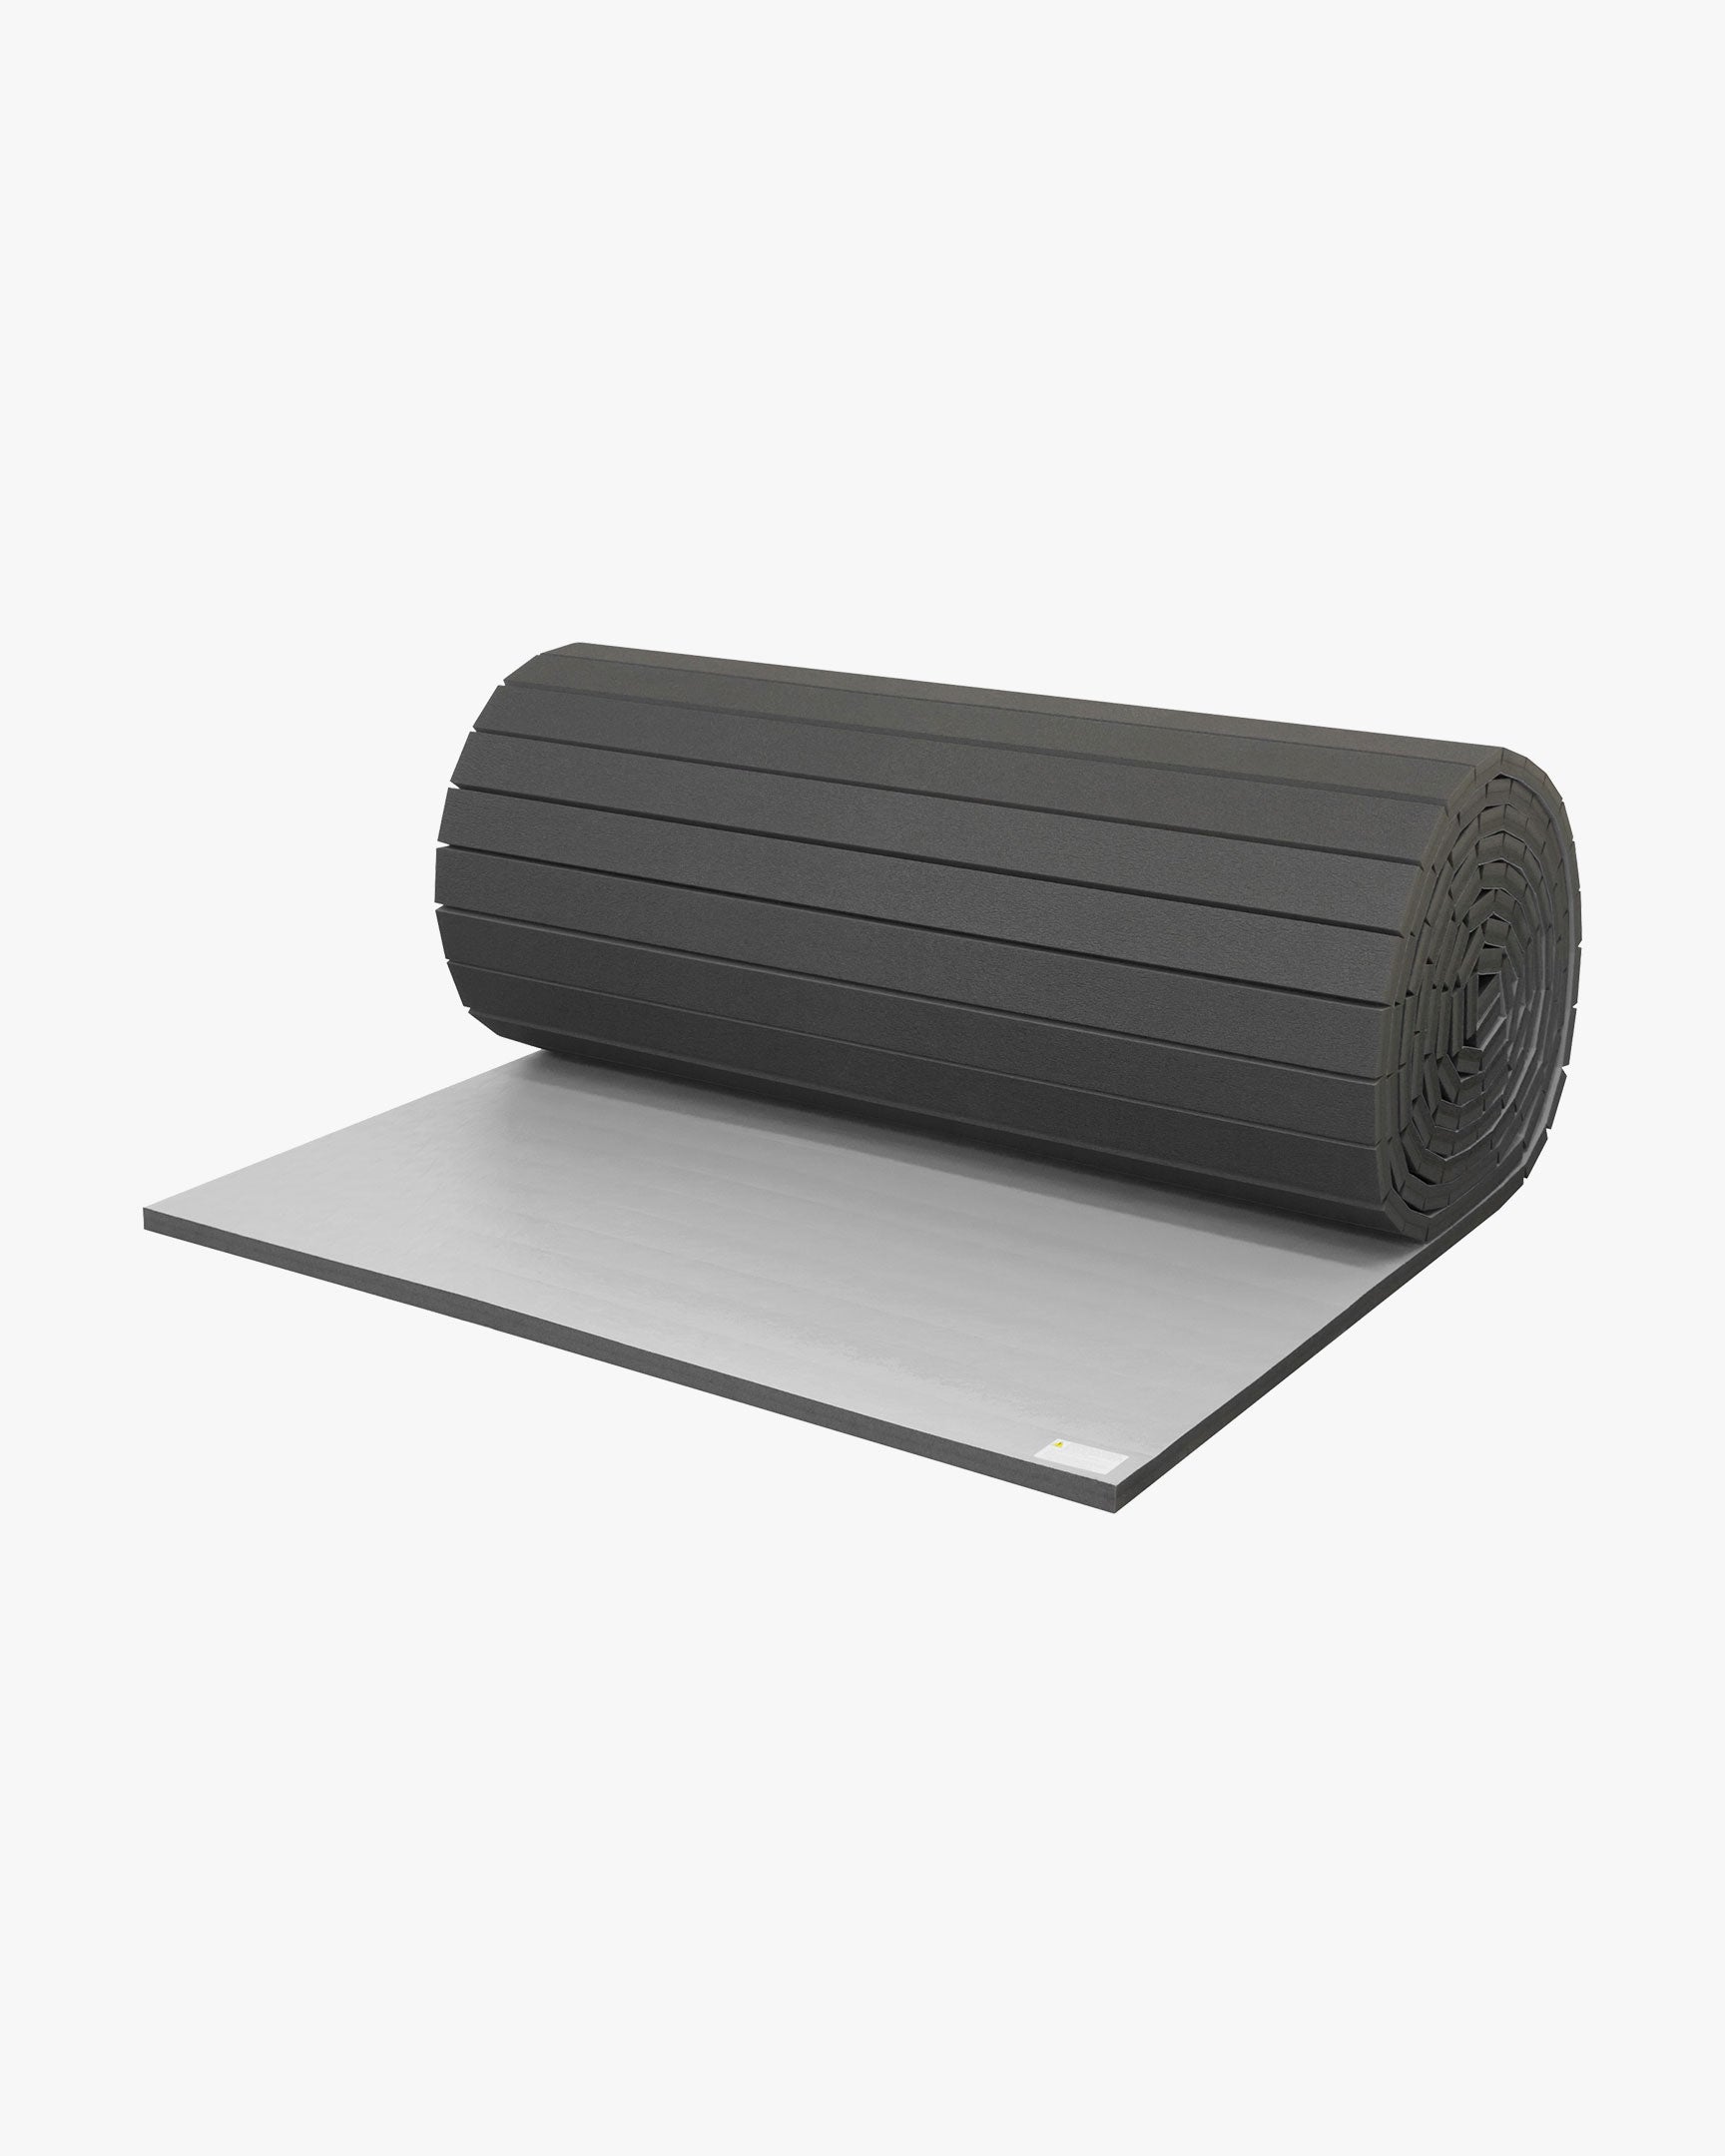 Custom Rollout Mat - 1.25 Inches Thick Charcoal Grey